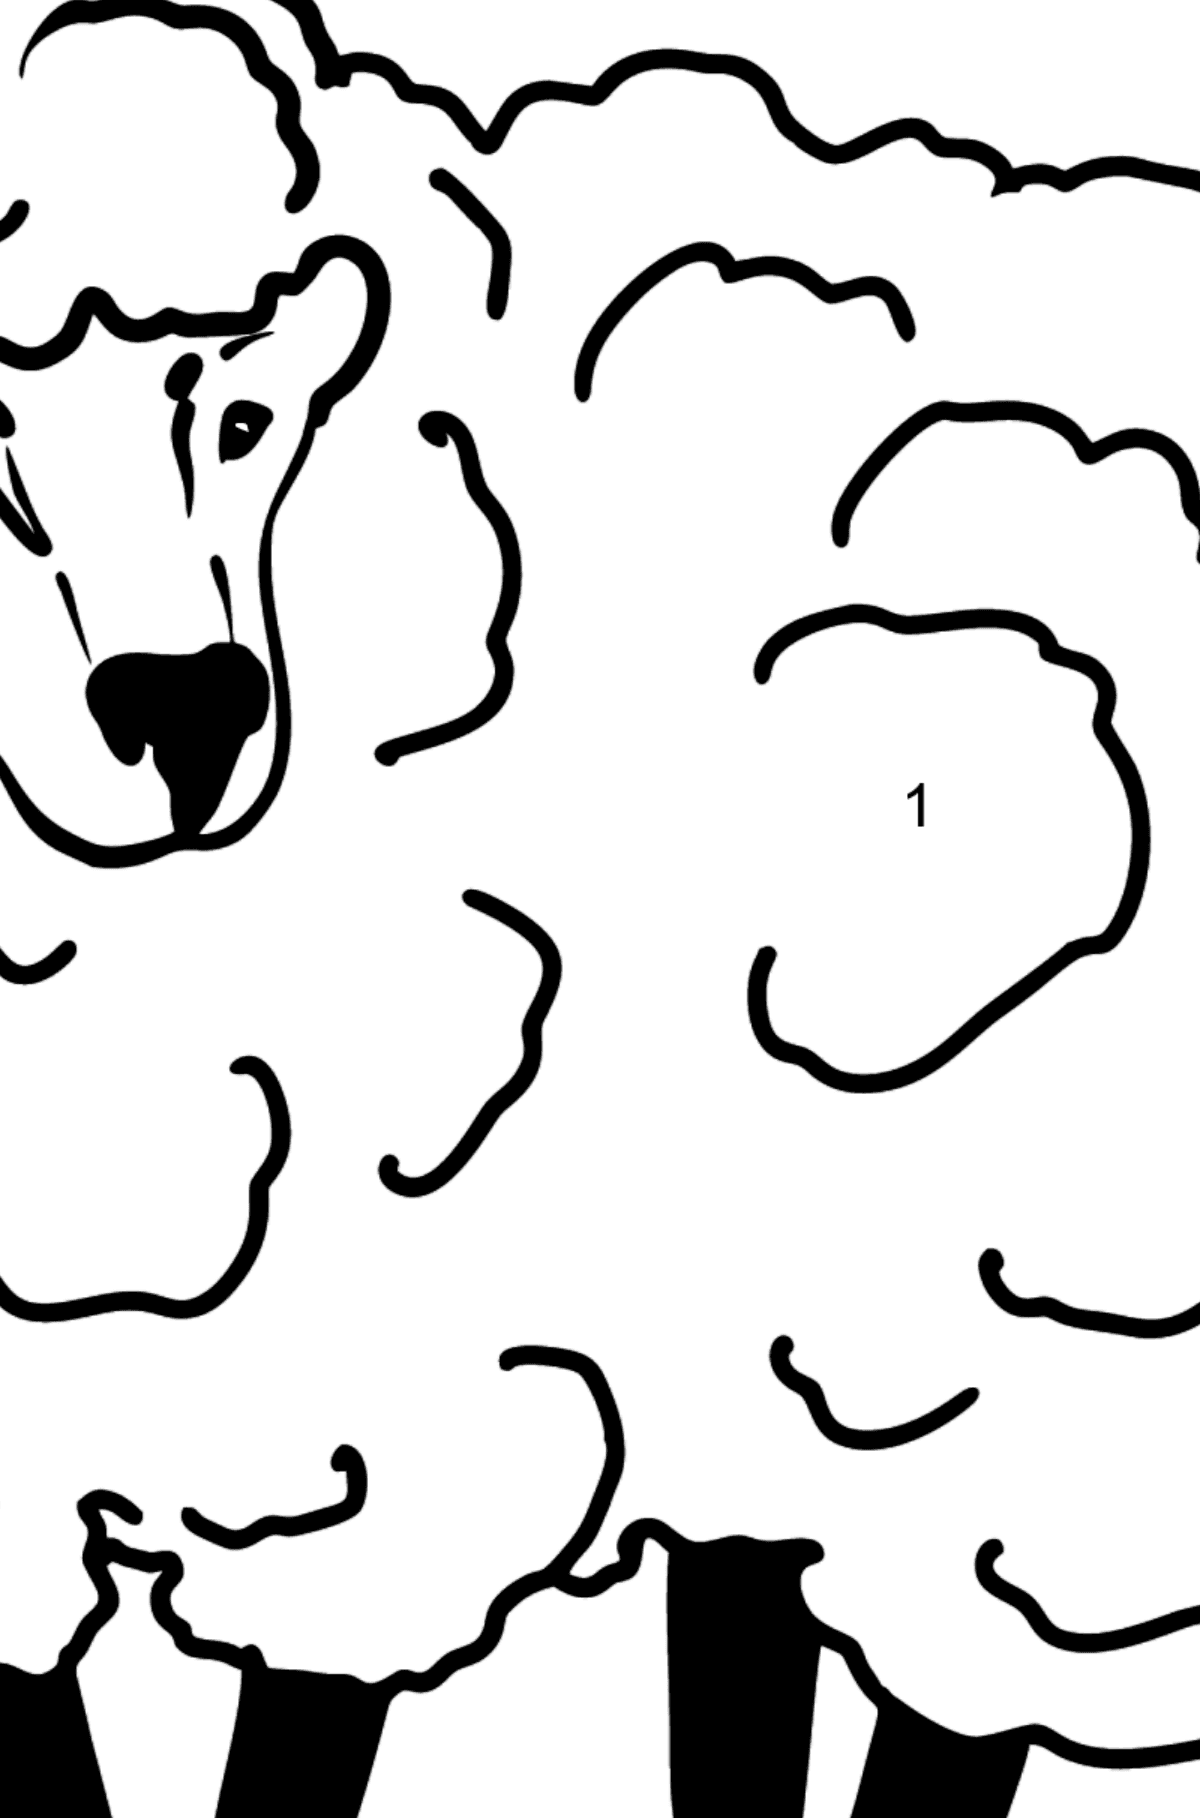 Sheep coloring page - Coloring by Numbers for Kids